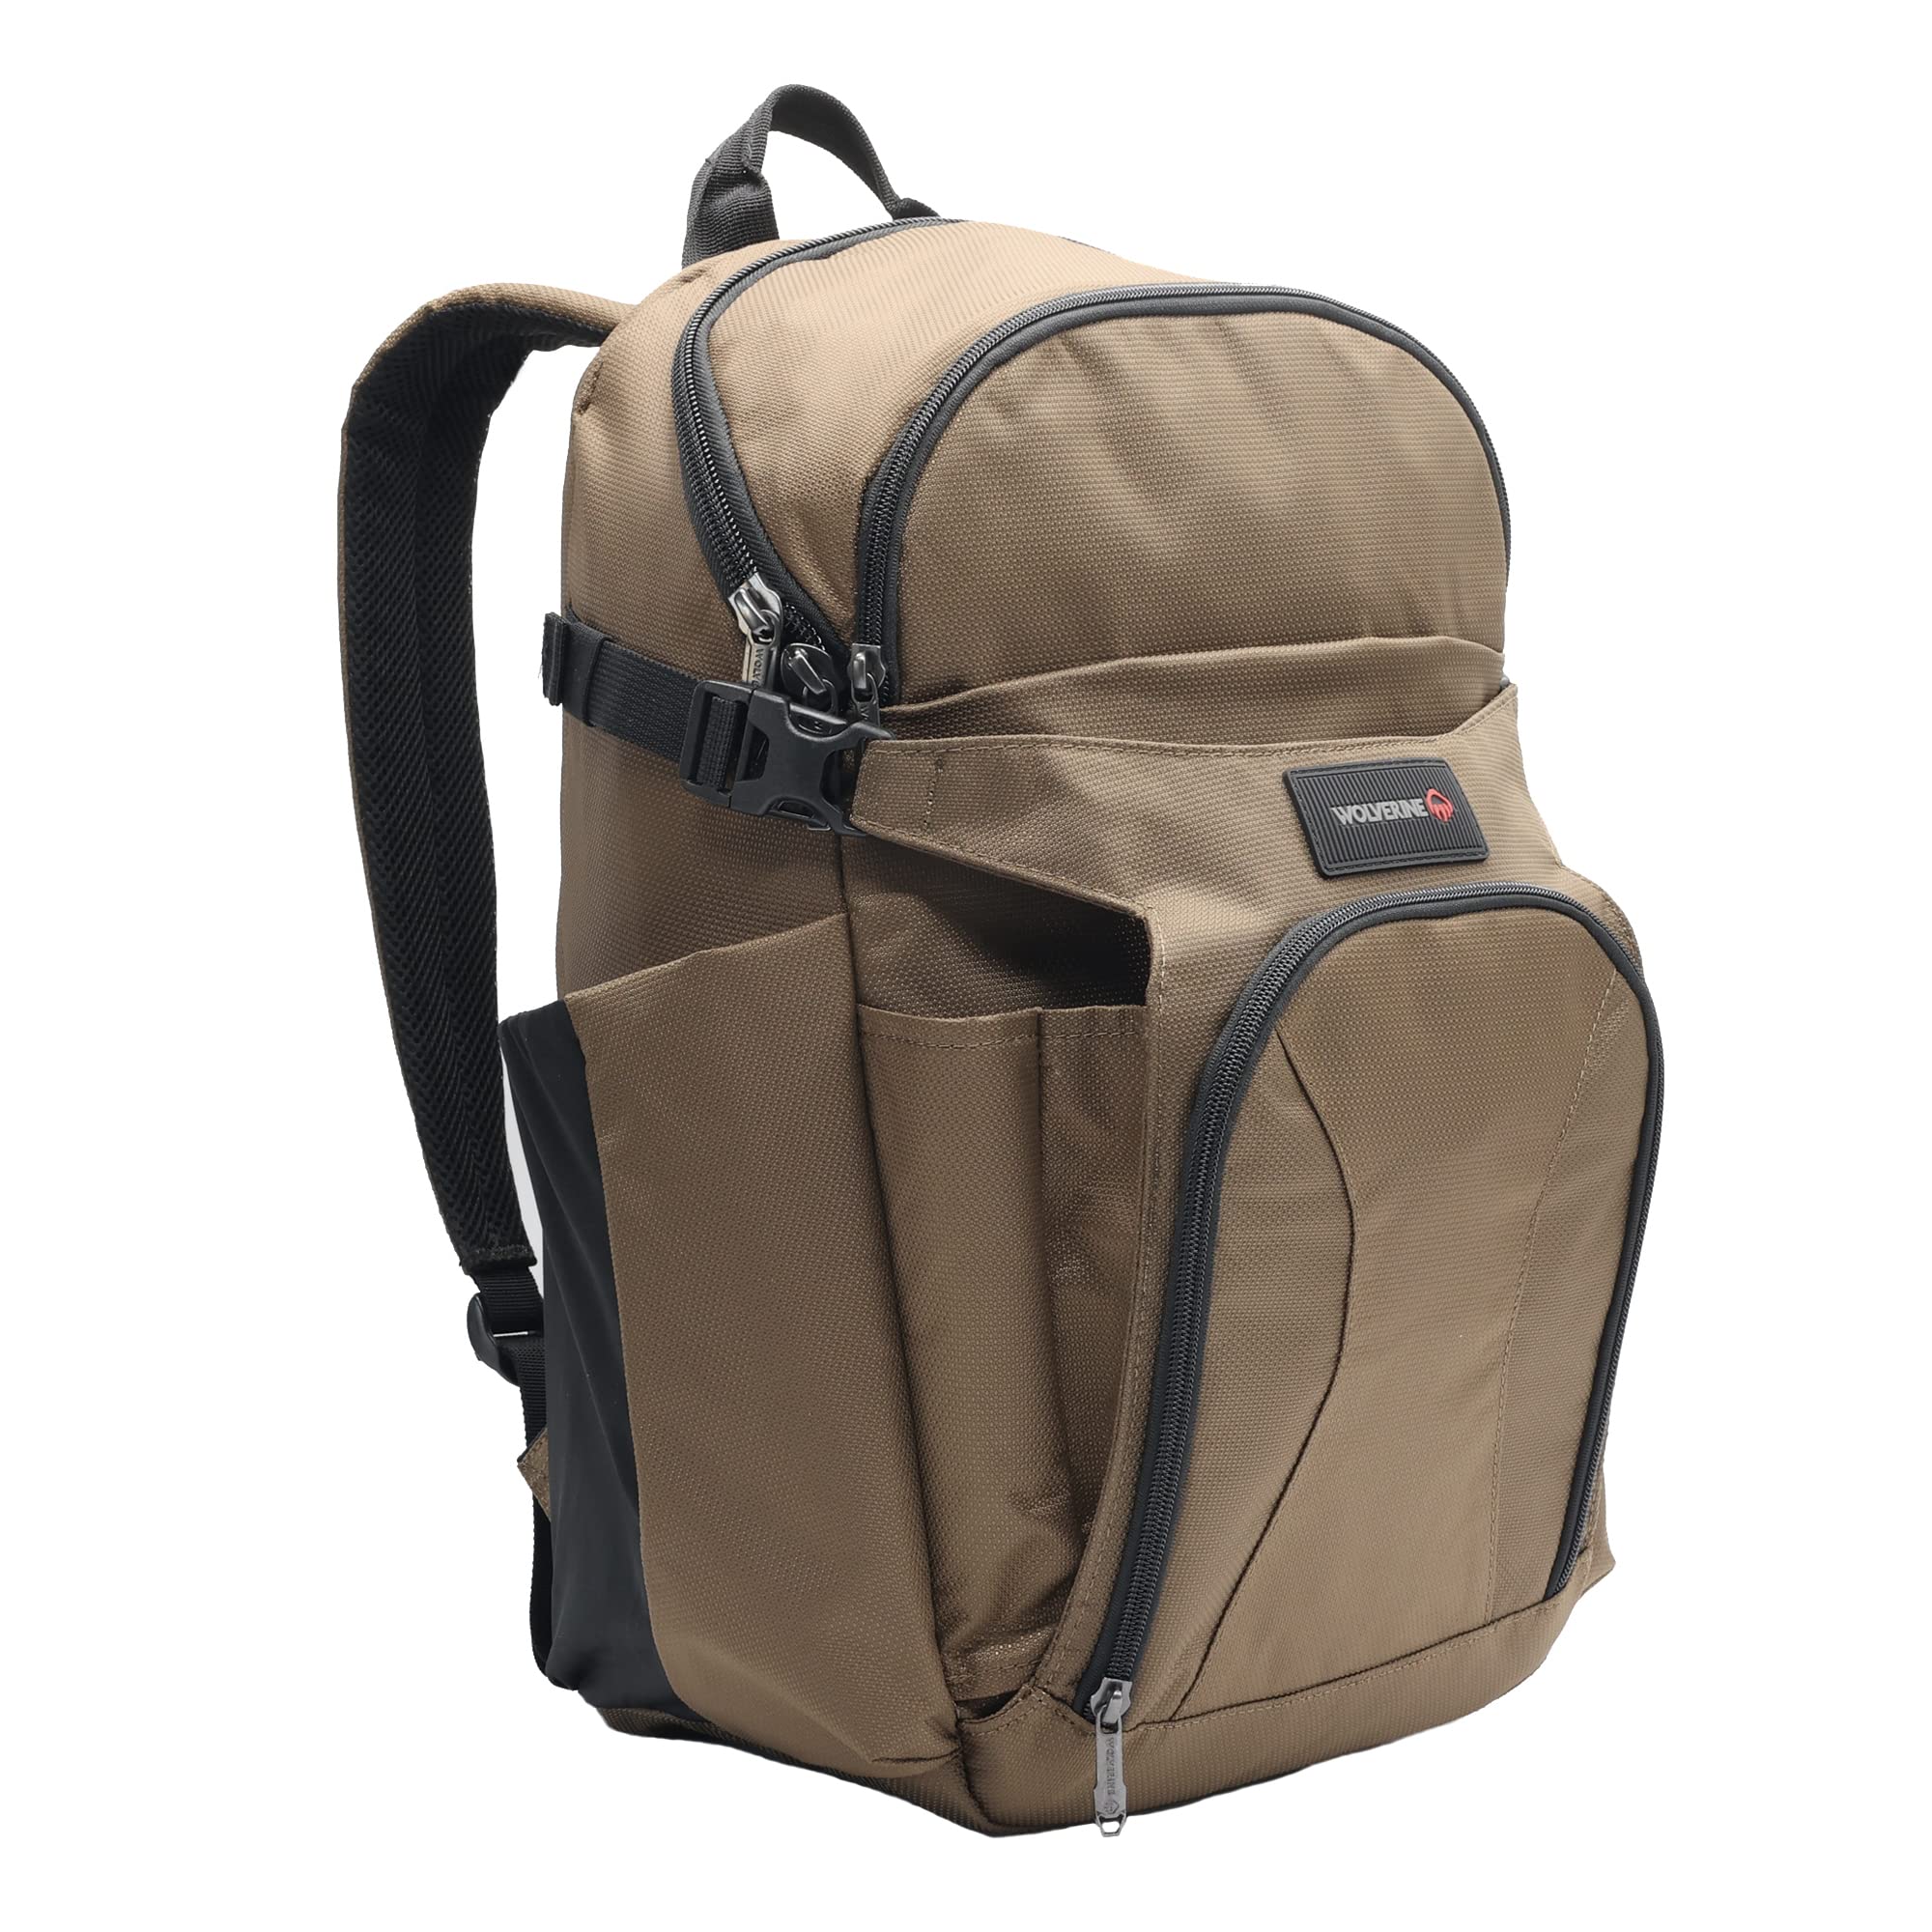 WOLVERINE 33l Cargo Pro Backpack with Expandable Helmet Stash, Laptop Compartment, 7 Pockets & Moisture Wicking Straps